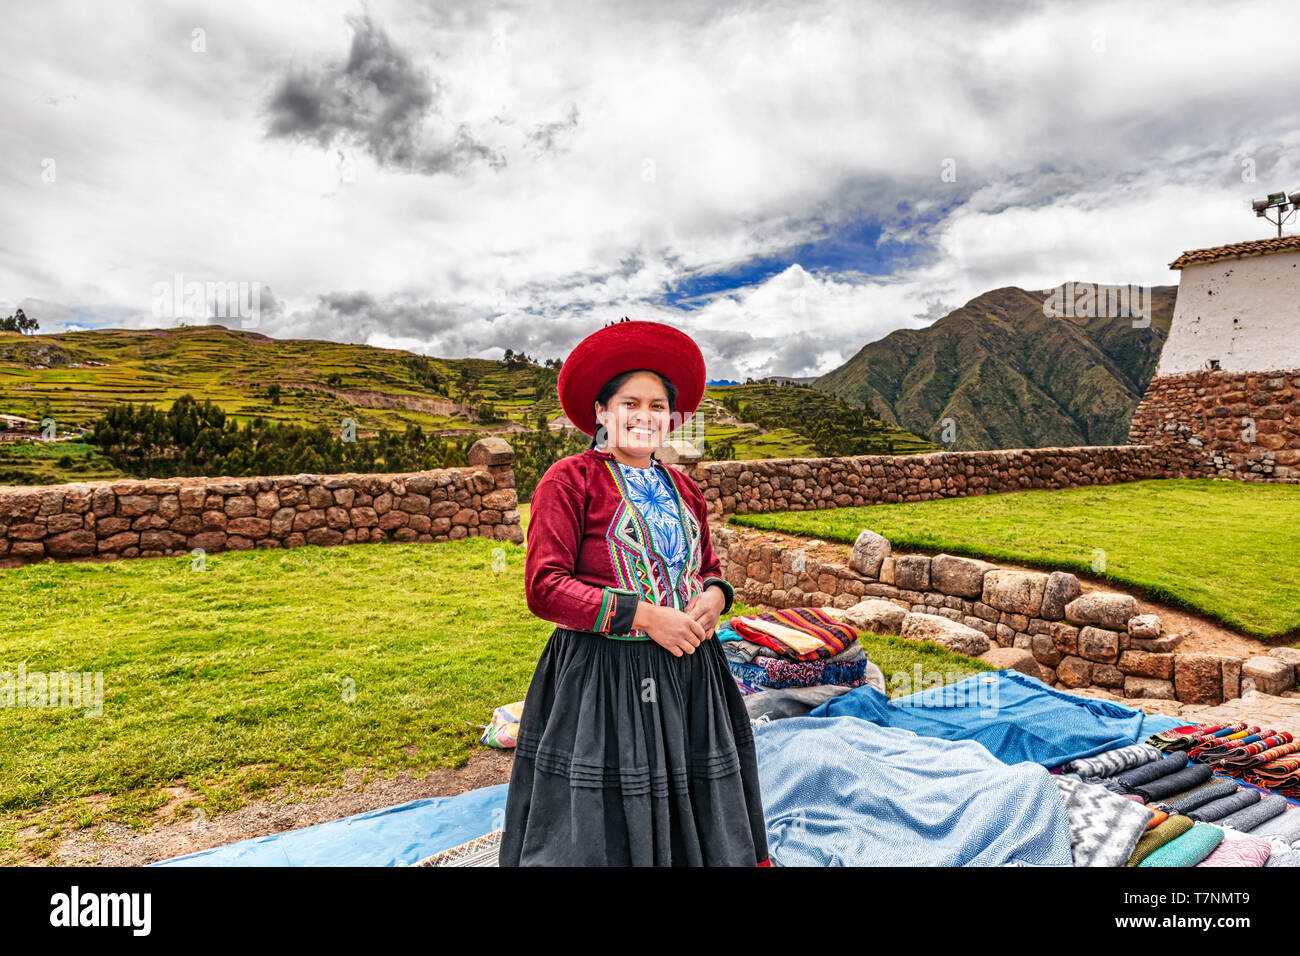 Chinchero, Peru – April 4, 2019: in Chinchero, Peru. local woman selling traditional Peruvian clothes, textile handicraft and knits products made of A Stock Photo